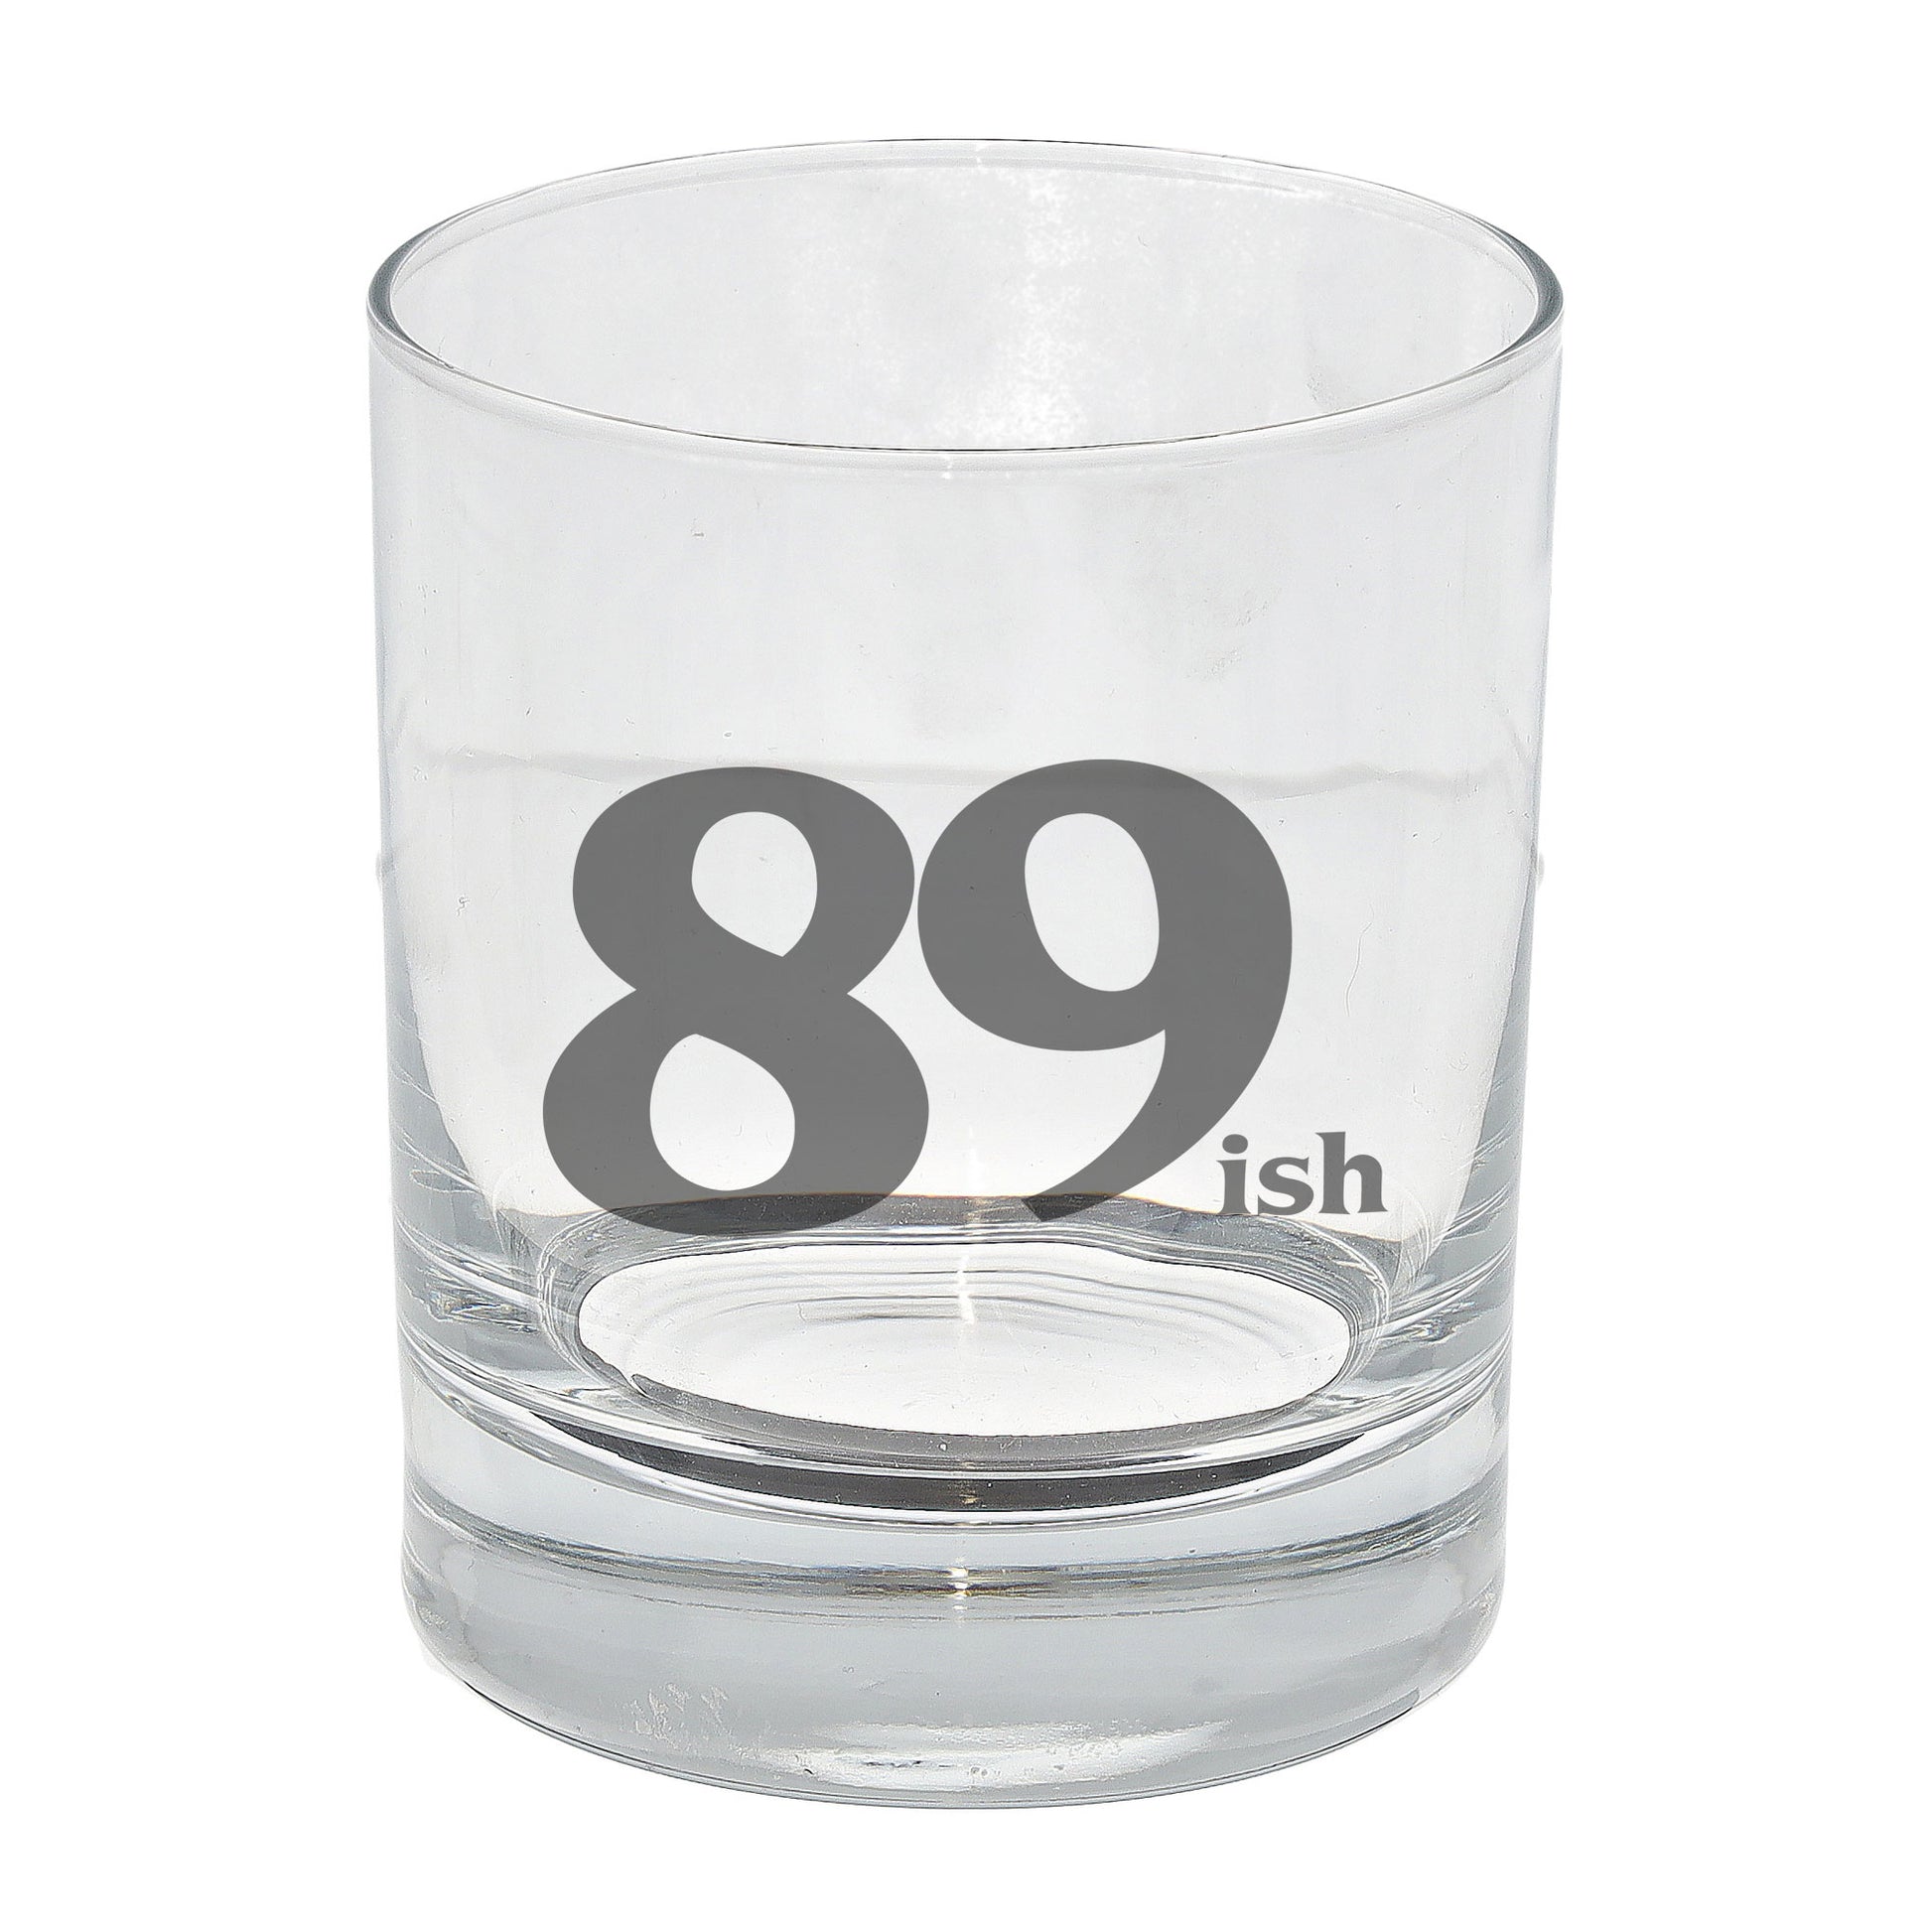 89ish Whisky Glass and/or Coaster Set  - Always Looking Good - Whisky Glass On Its Own  